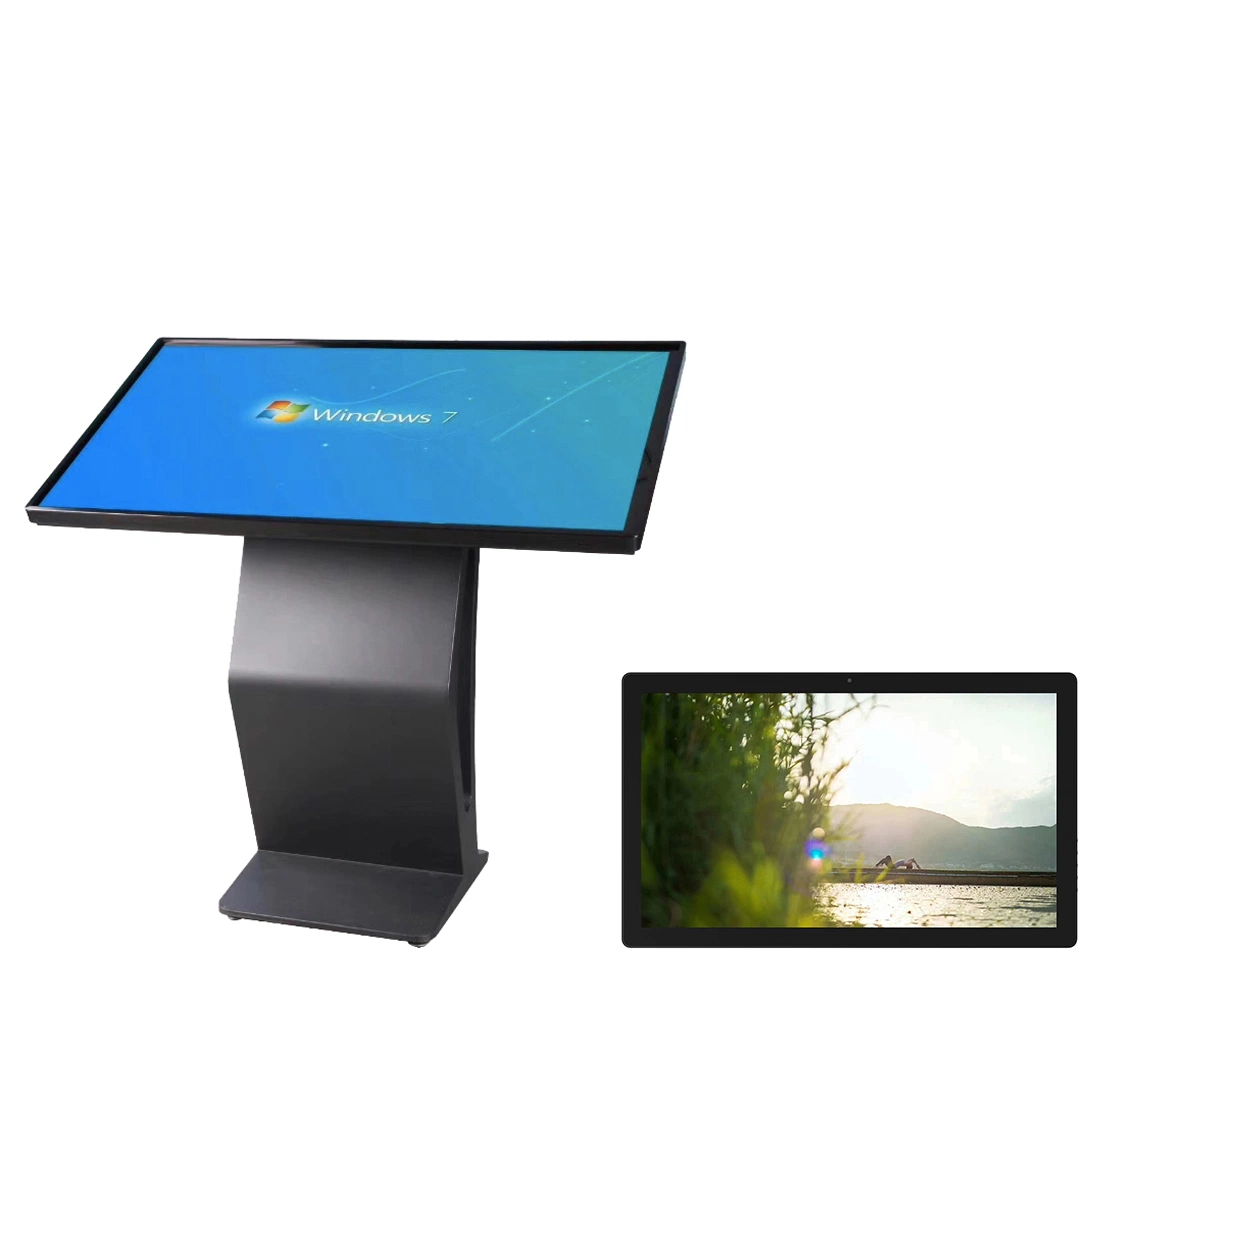 32 Inch Capacitive Touch Android Self Service Payment Interactive Advertising LCD Kiosk